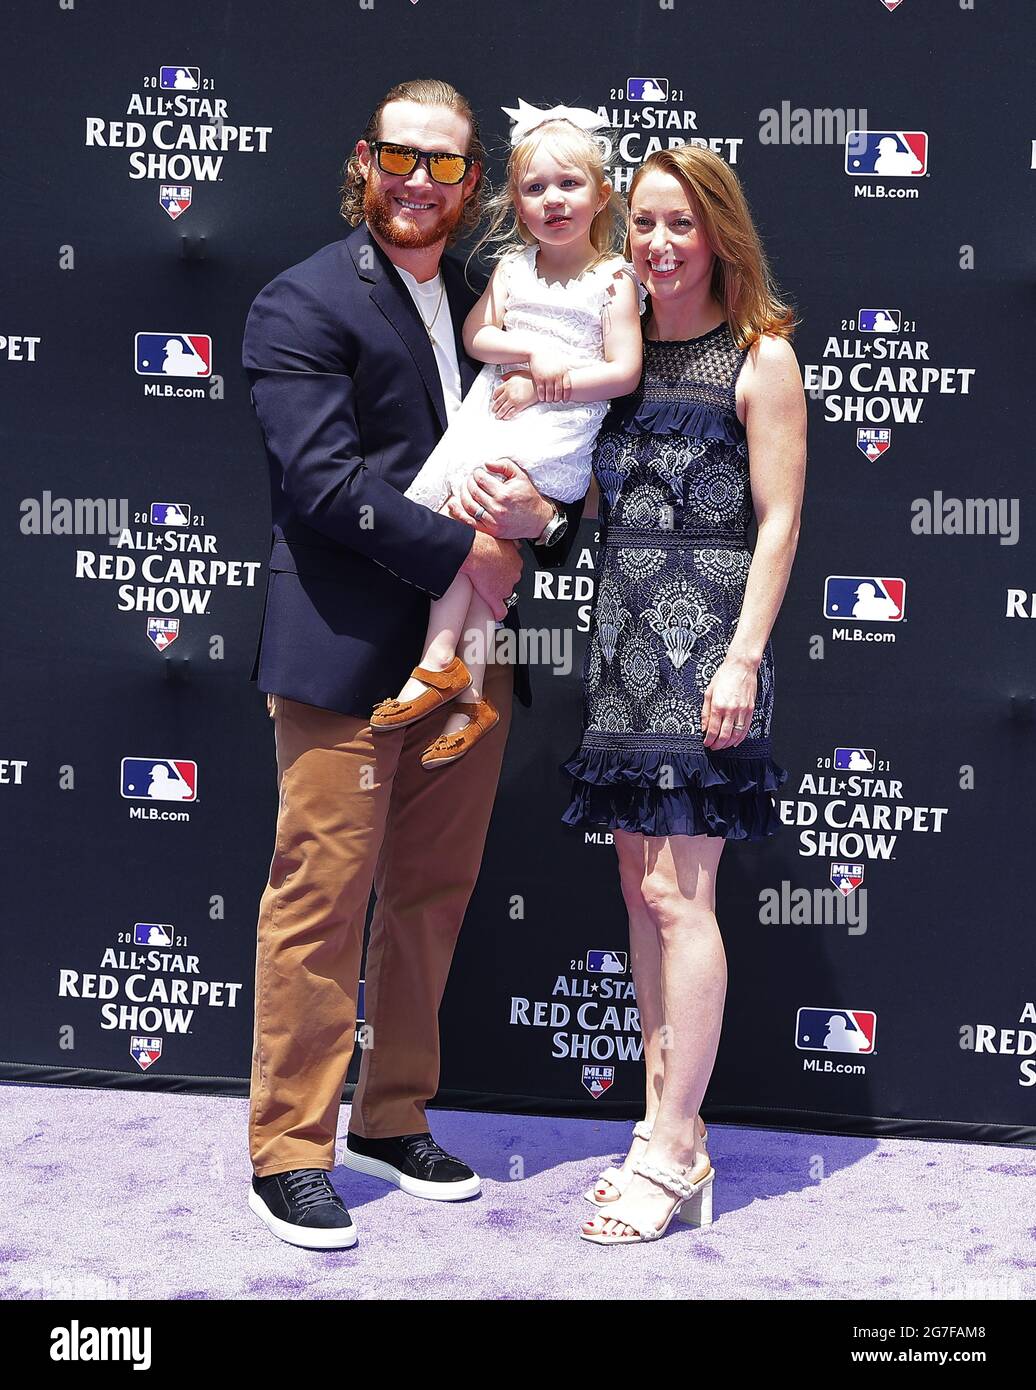 Denver, United States. 13th July, 2021. Chicago Cubs Craig Kimbrel poses  with his family during the MLB All-Star Red Carpet Show at Coors Field in  Denver, Colorado, on Tuesday, July 13, 2021.